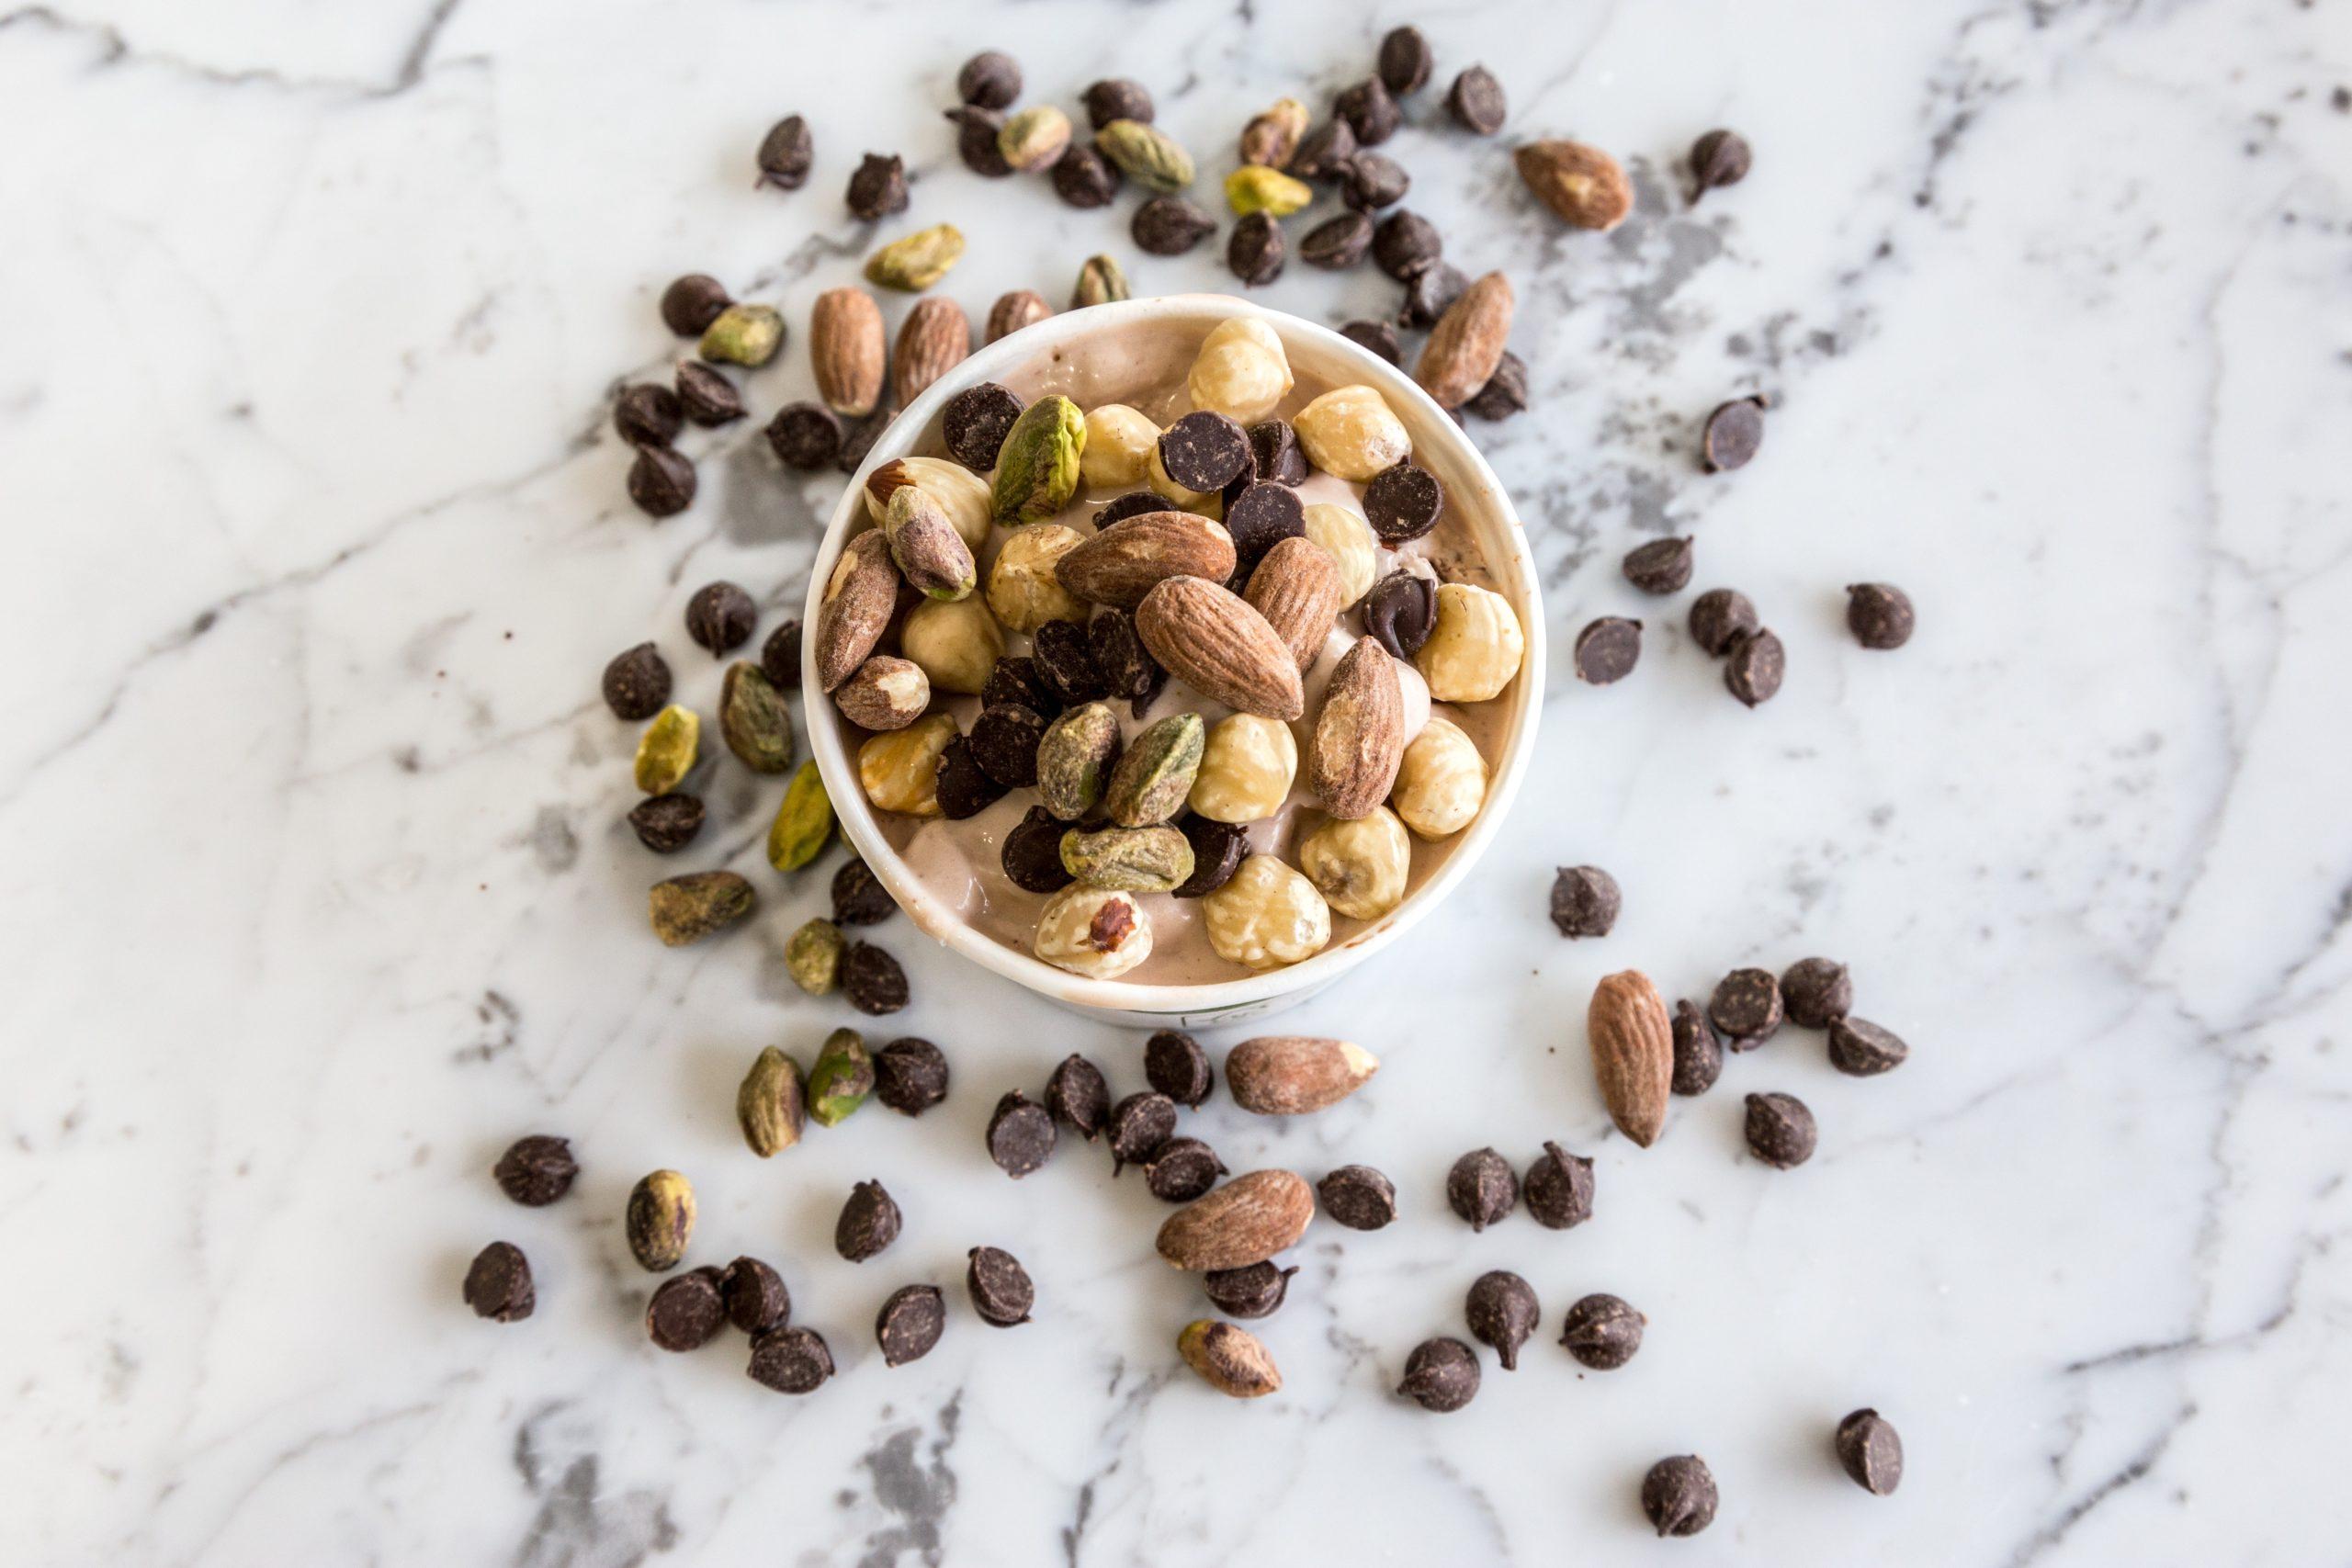 There are many benefits of frozen meals. Adding nuts is a great way to increase the nutritional value of frozen meals.